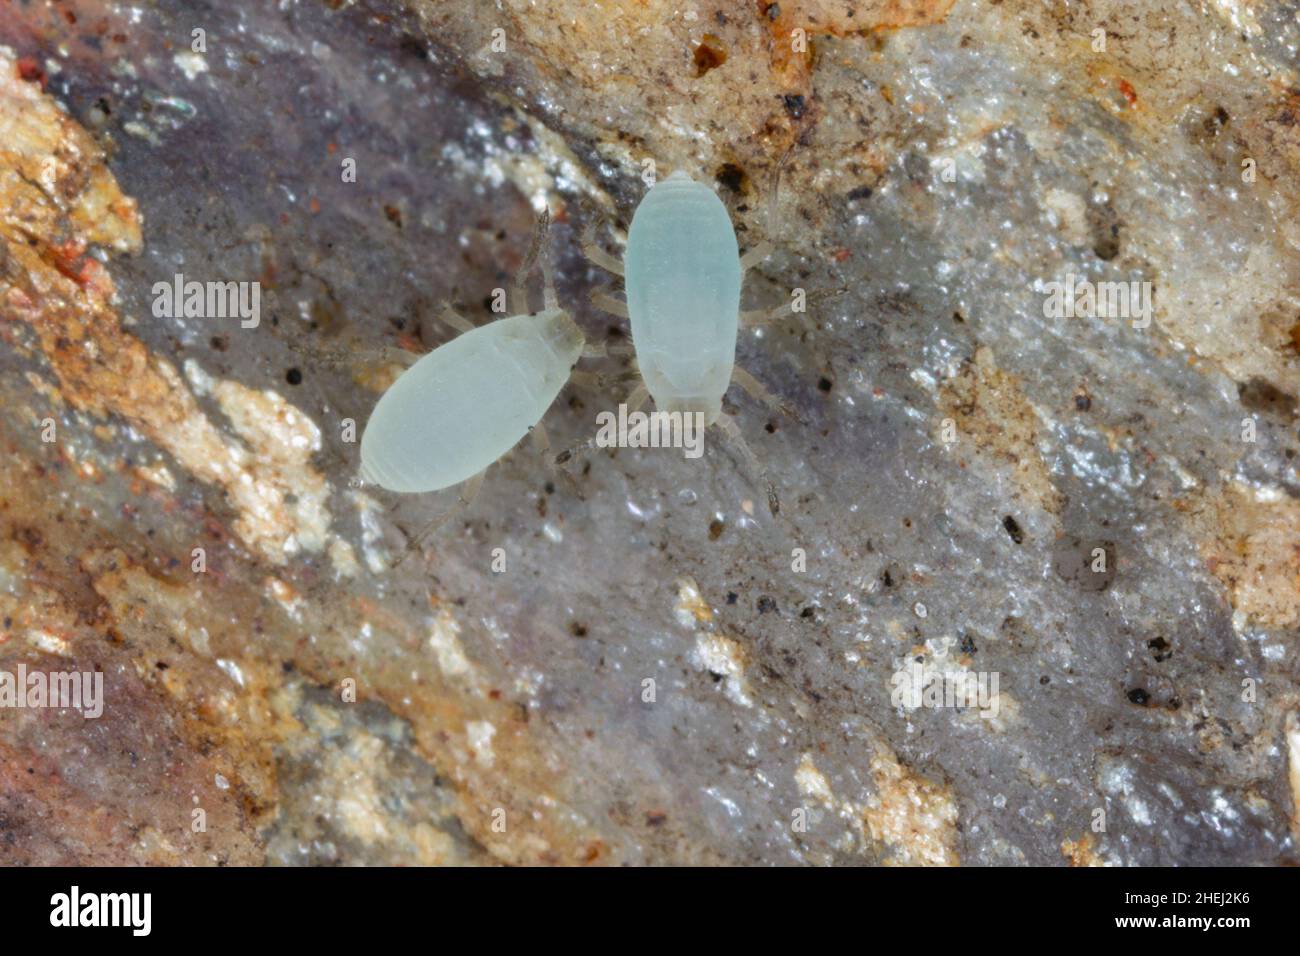 Underground aphids found under a stone in the garden. High magnification. Stock Photo